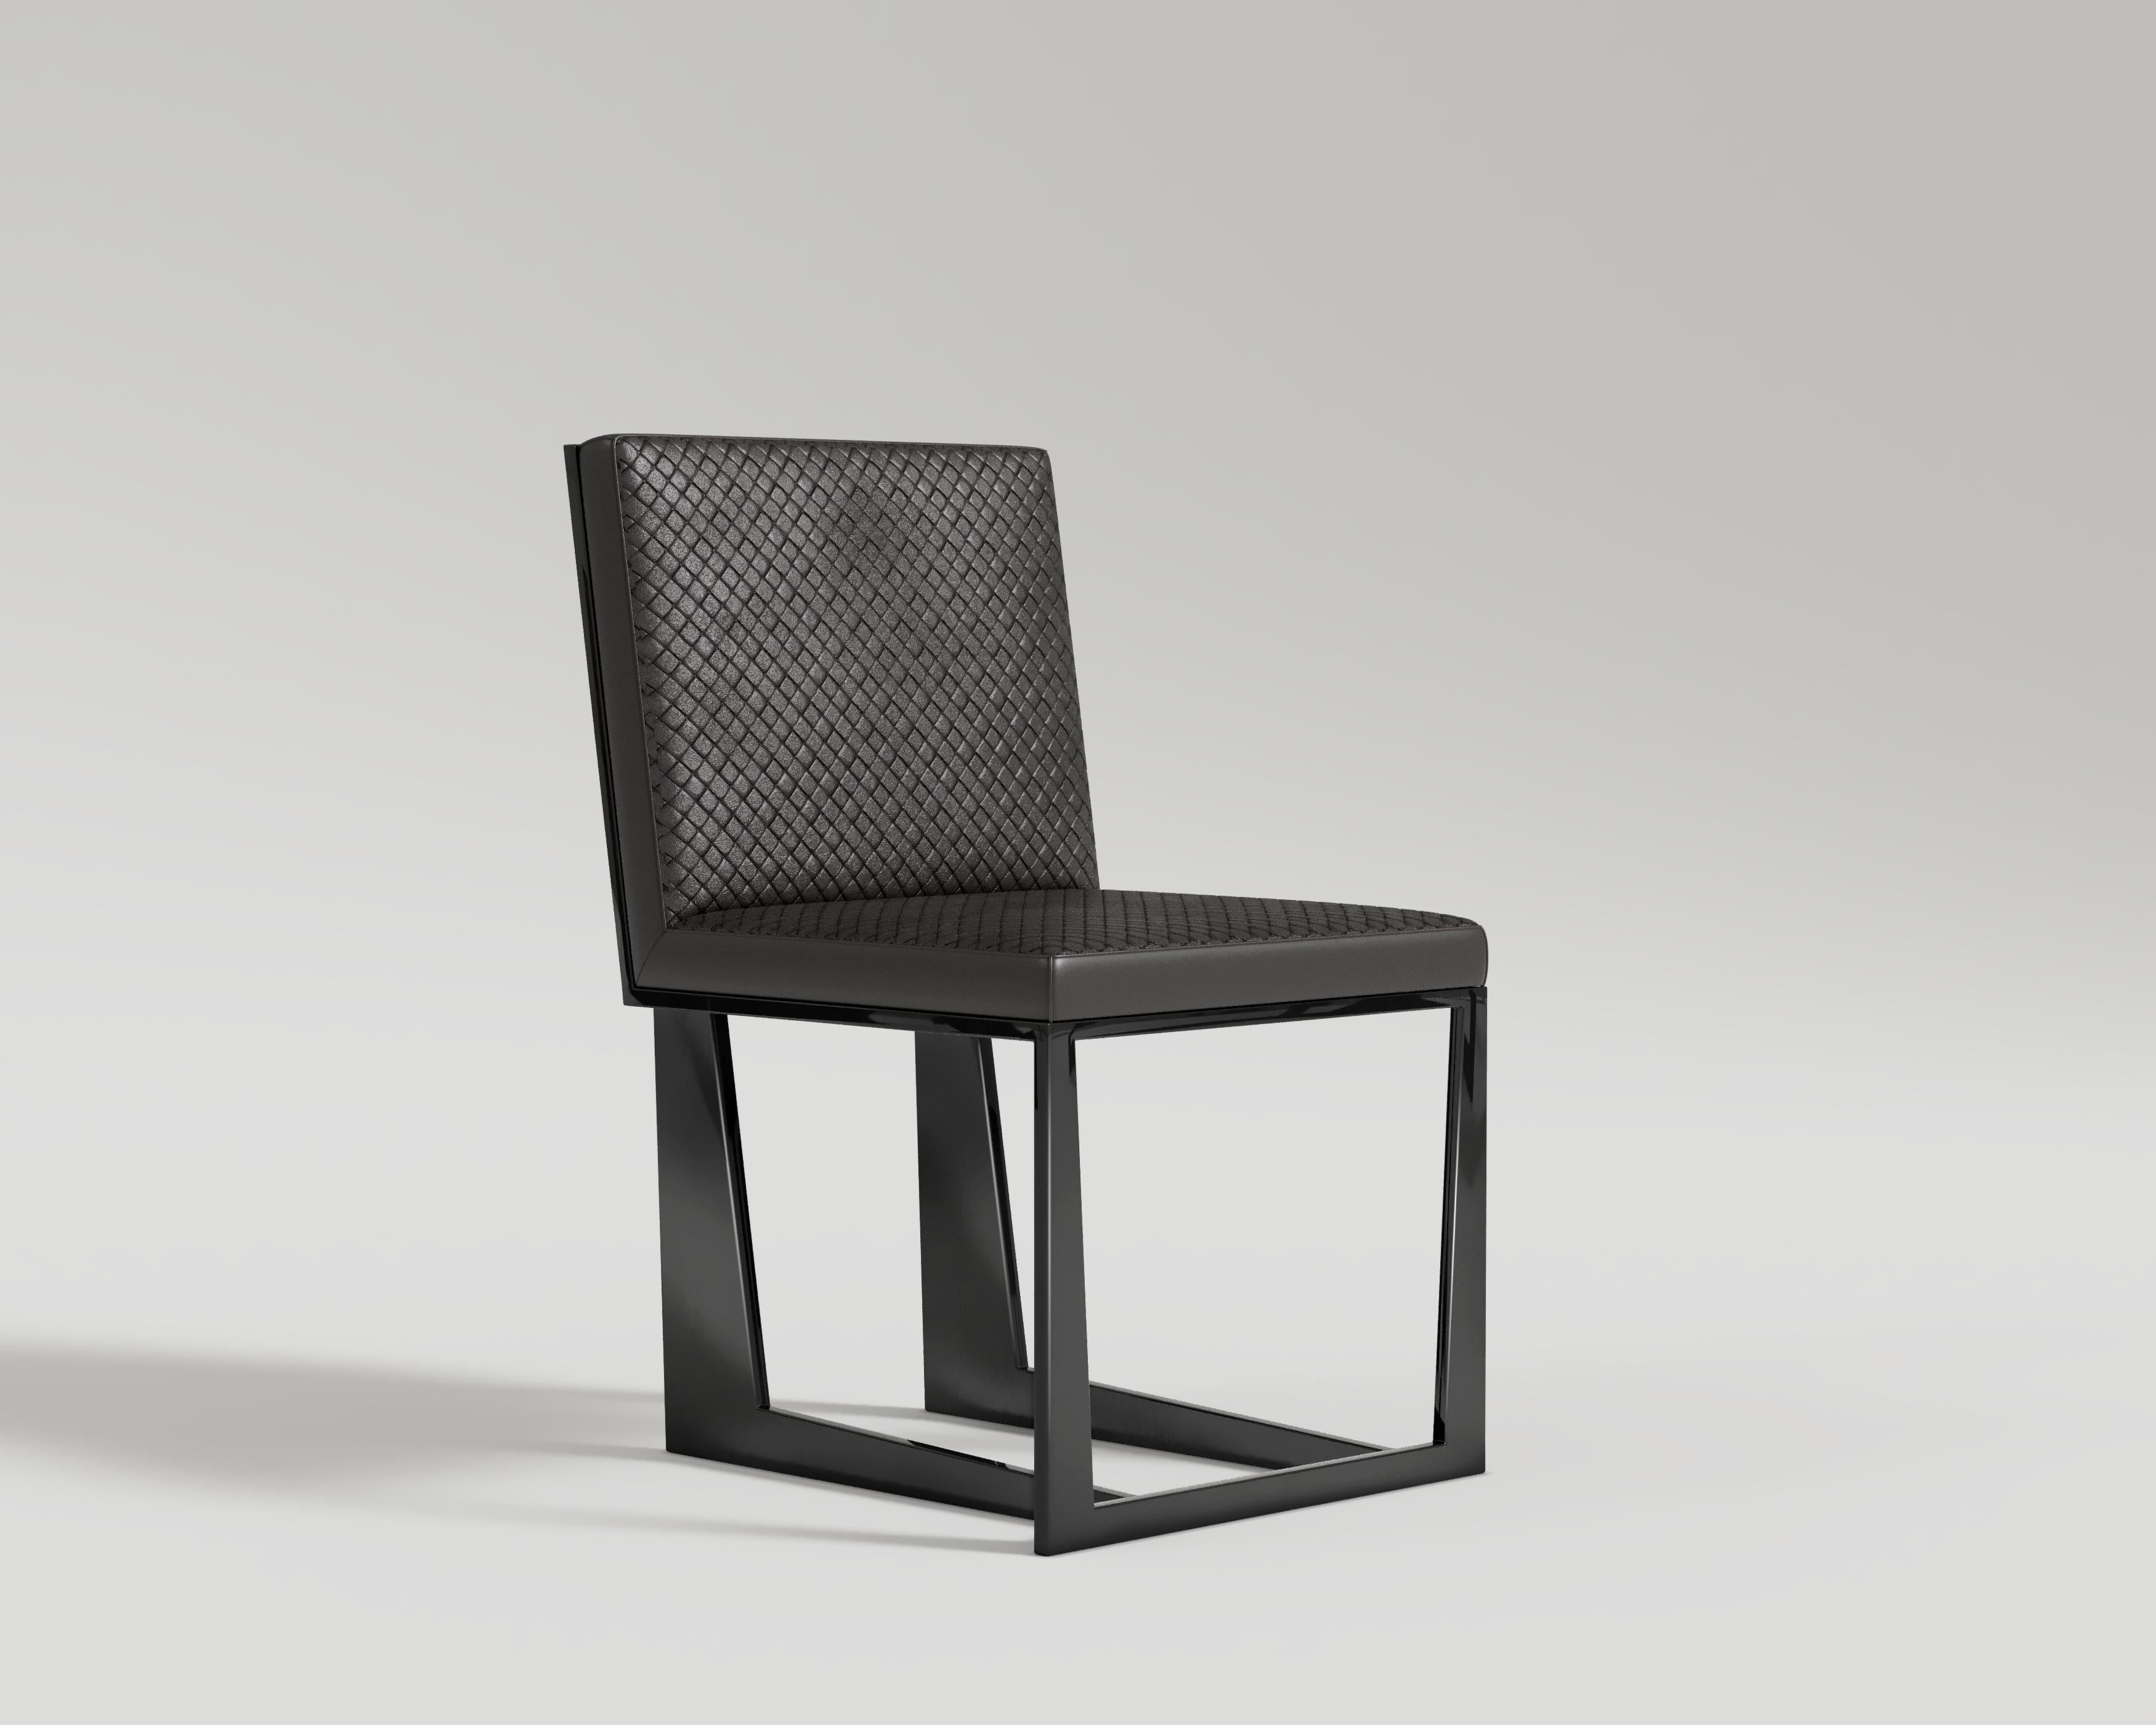 Affilato Chair
The Affilato dining chair features a meticulously crafted design that combines a sturdy metal frame with luxurious leather seating. Hand-made with precision and attention to detail, the chair boasts a sleek and modern aesthetic. The